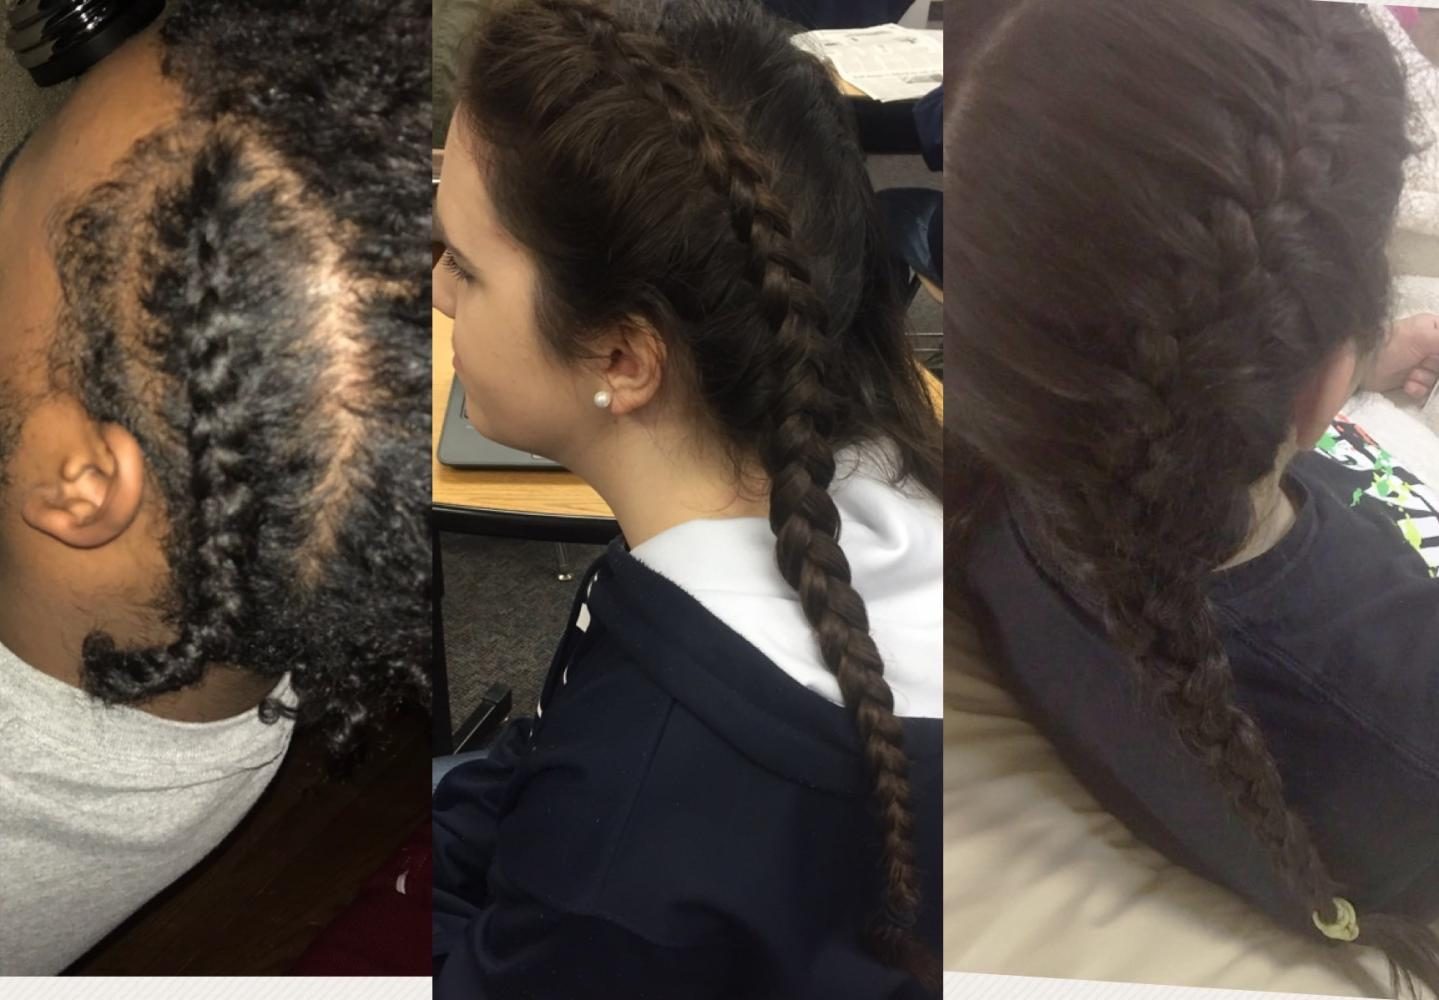 Daelin Brown walks you through the steps of achieving the perfect hairdo